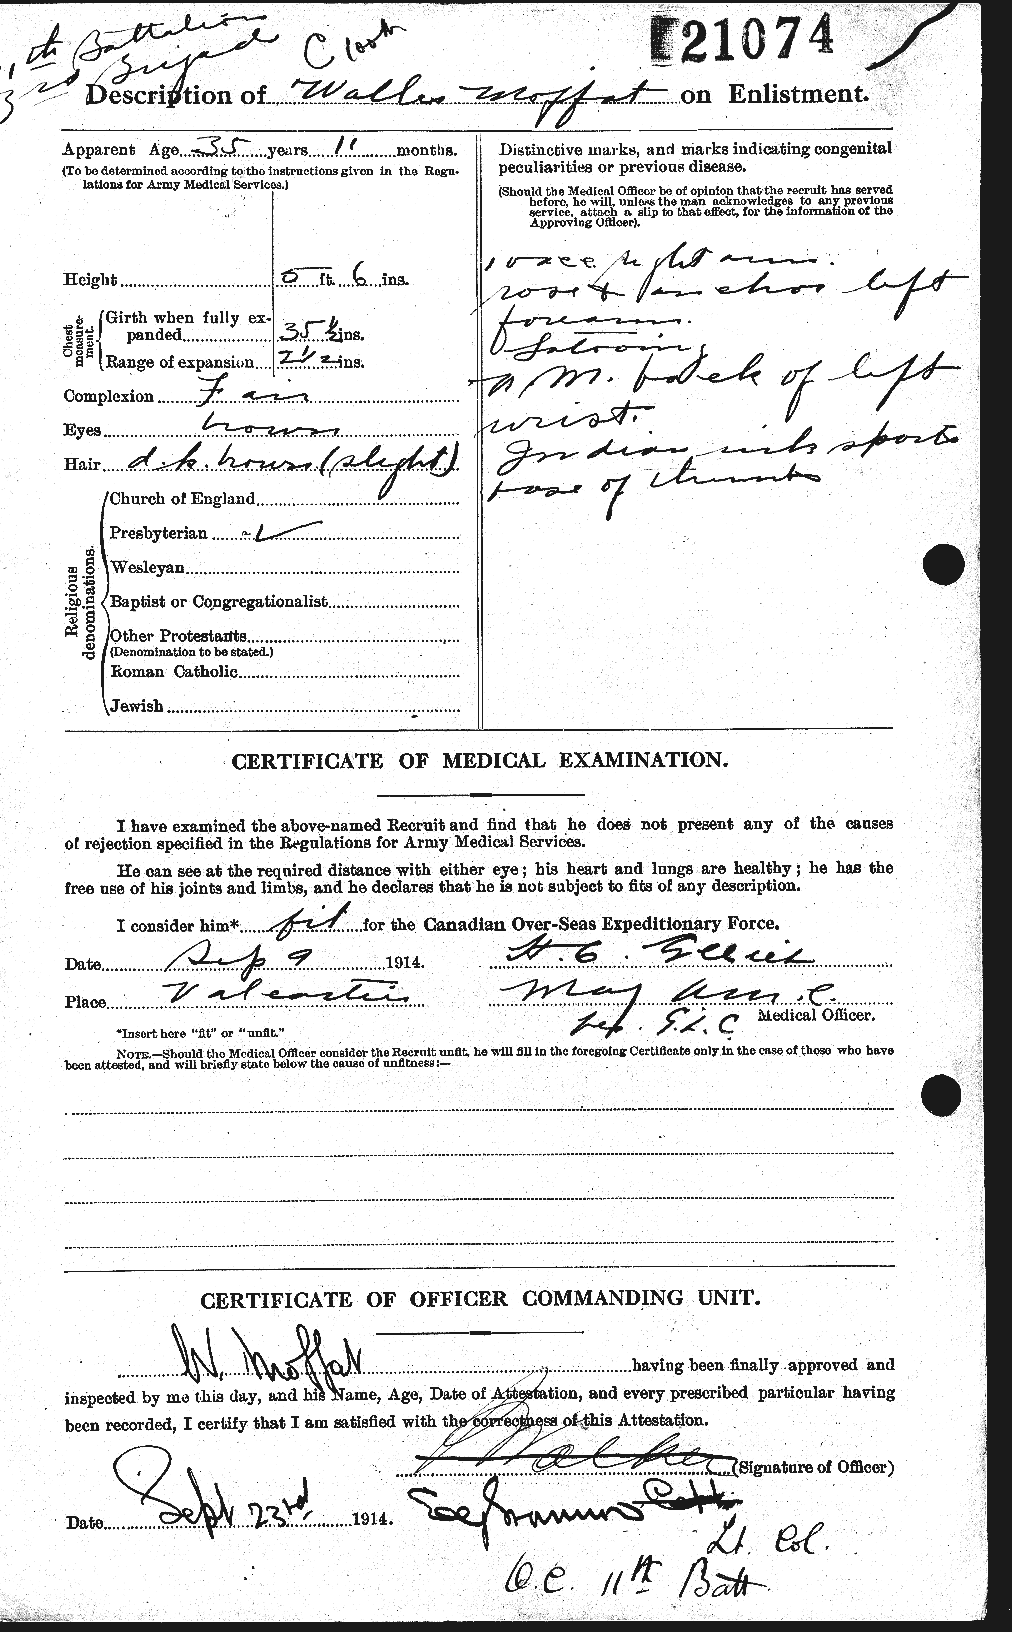 Personnel Records of the First World War - CEF 499080b